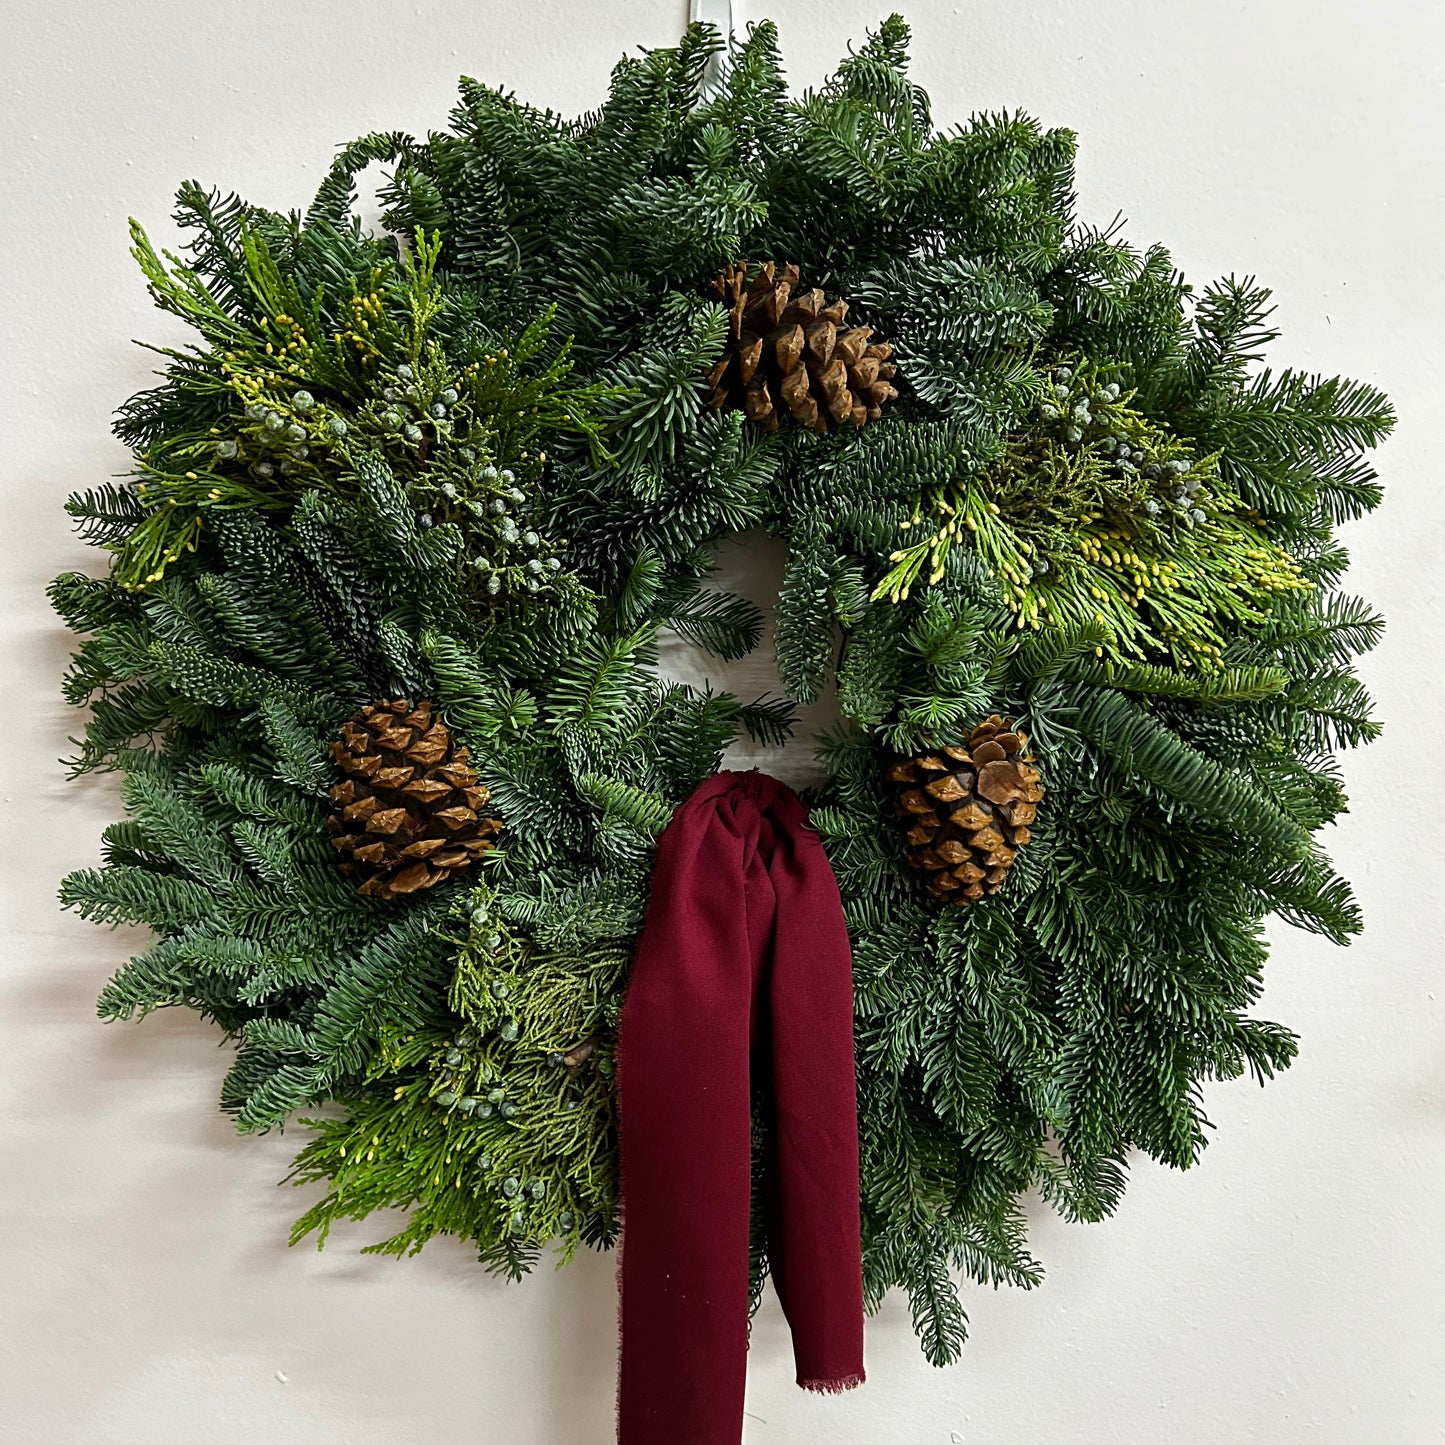 Large Mixed Greens & Pinecone Wreath